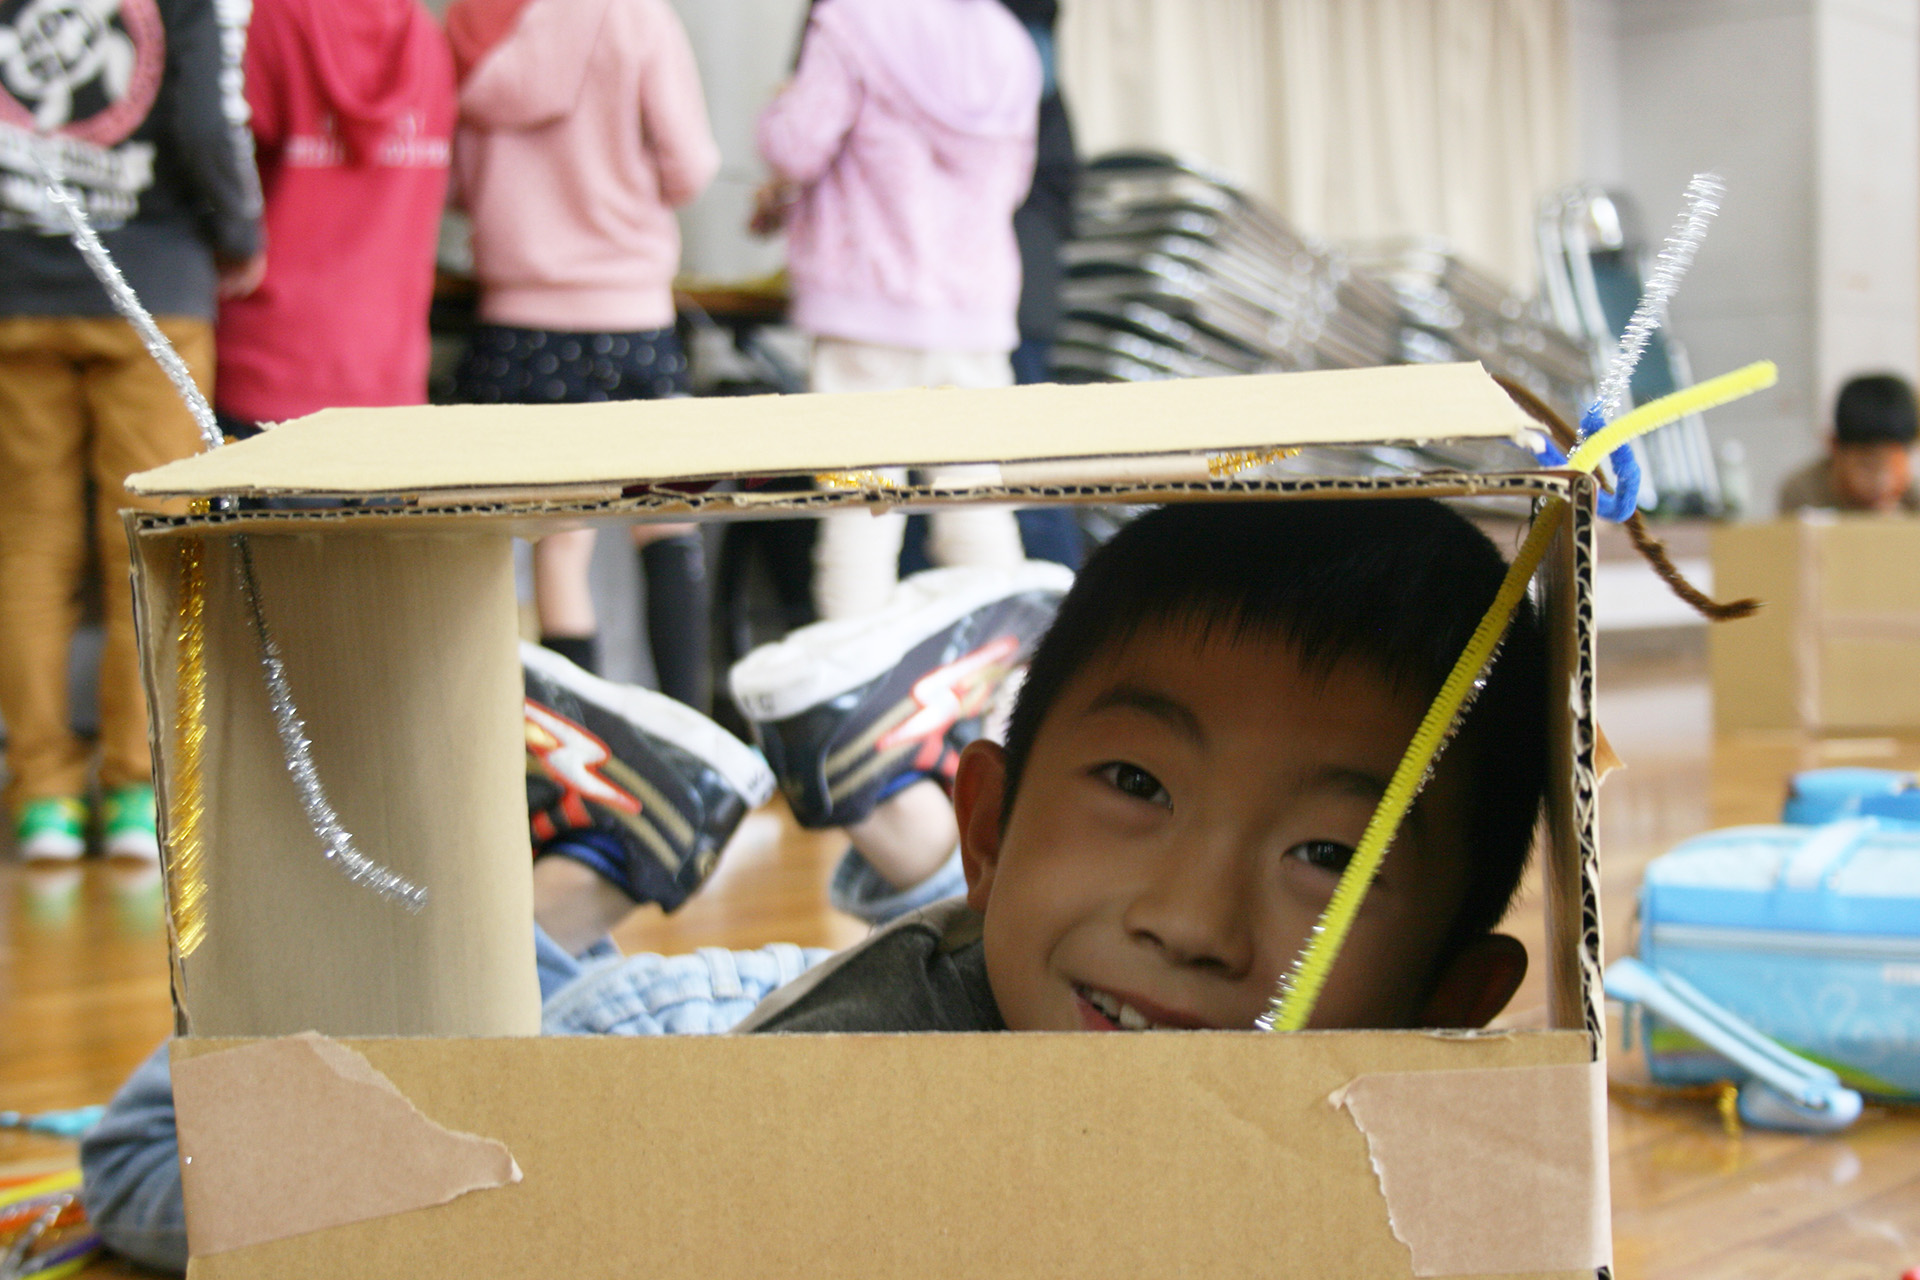 A workshop photo. A child peers out of a cardboard box, smiling at the camera.